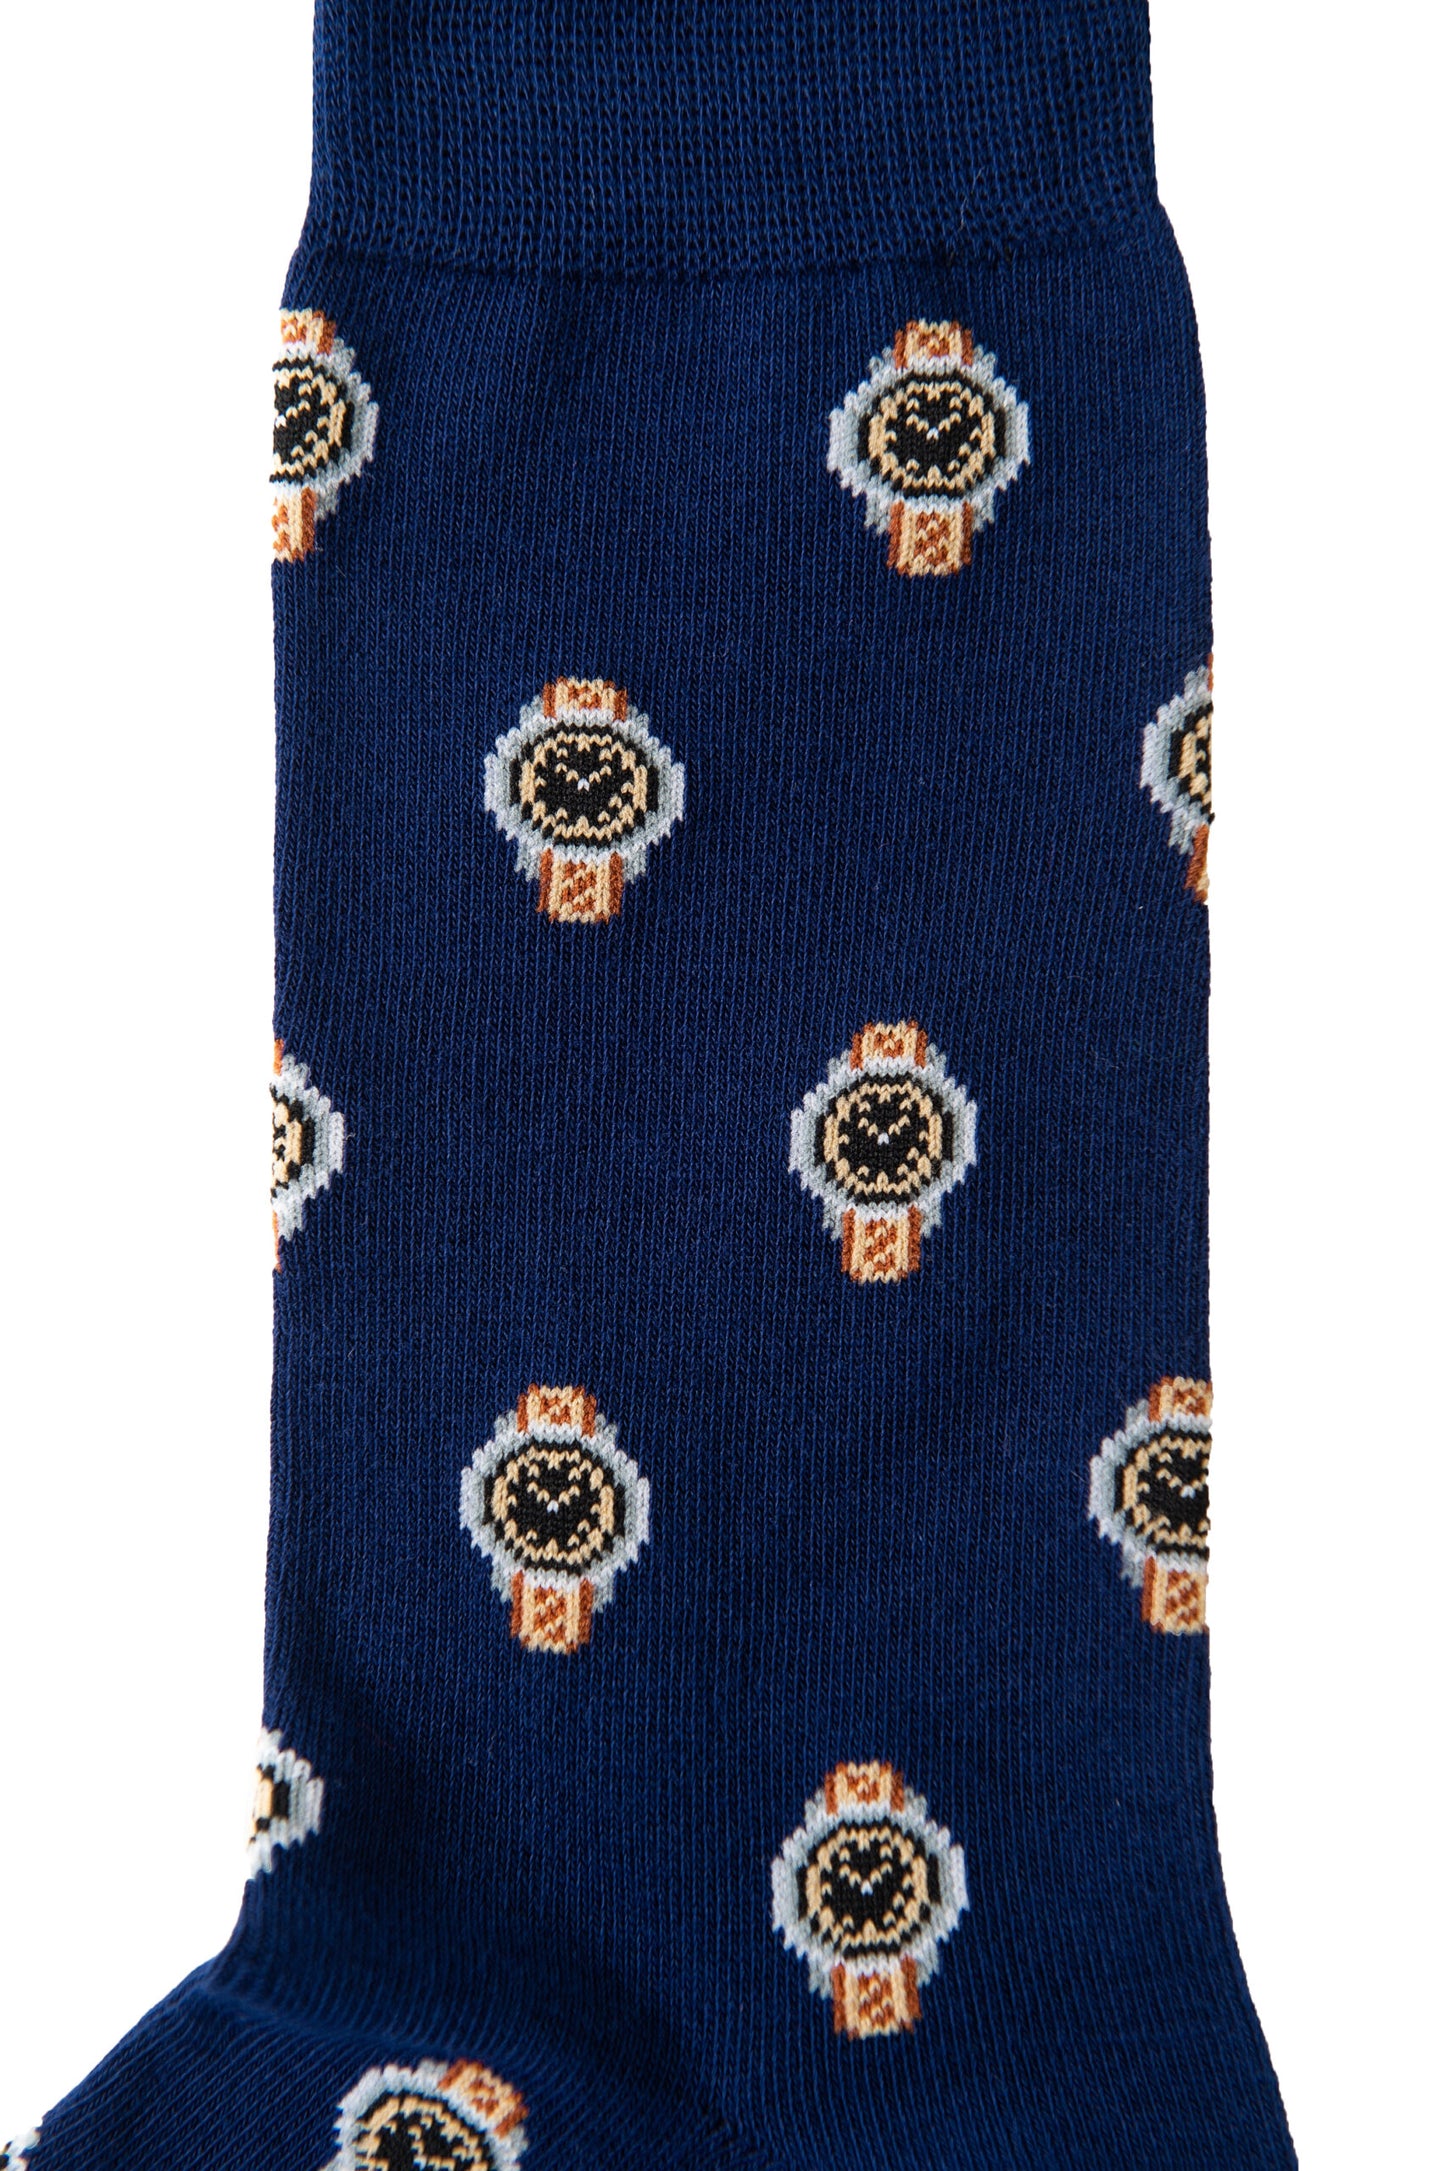 Watch Socks featuring a pattern of small, detailed watches with white and gold colors, exuding timeless elegance.